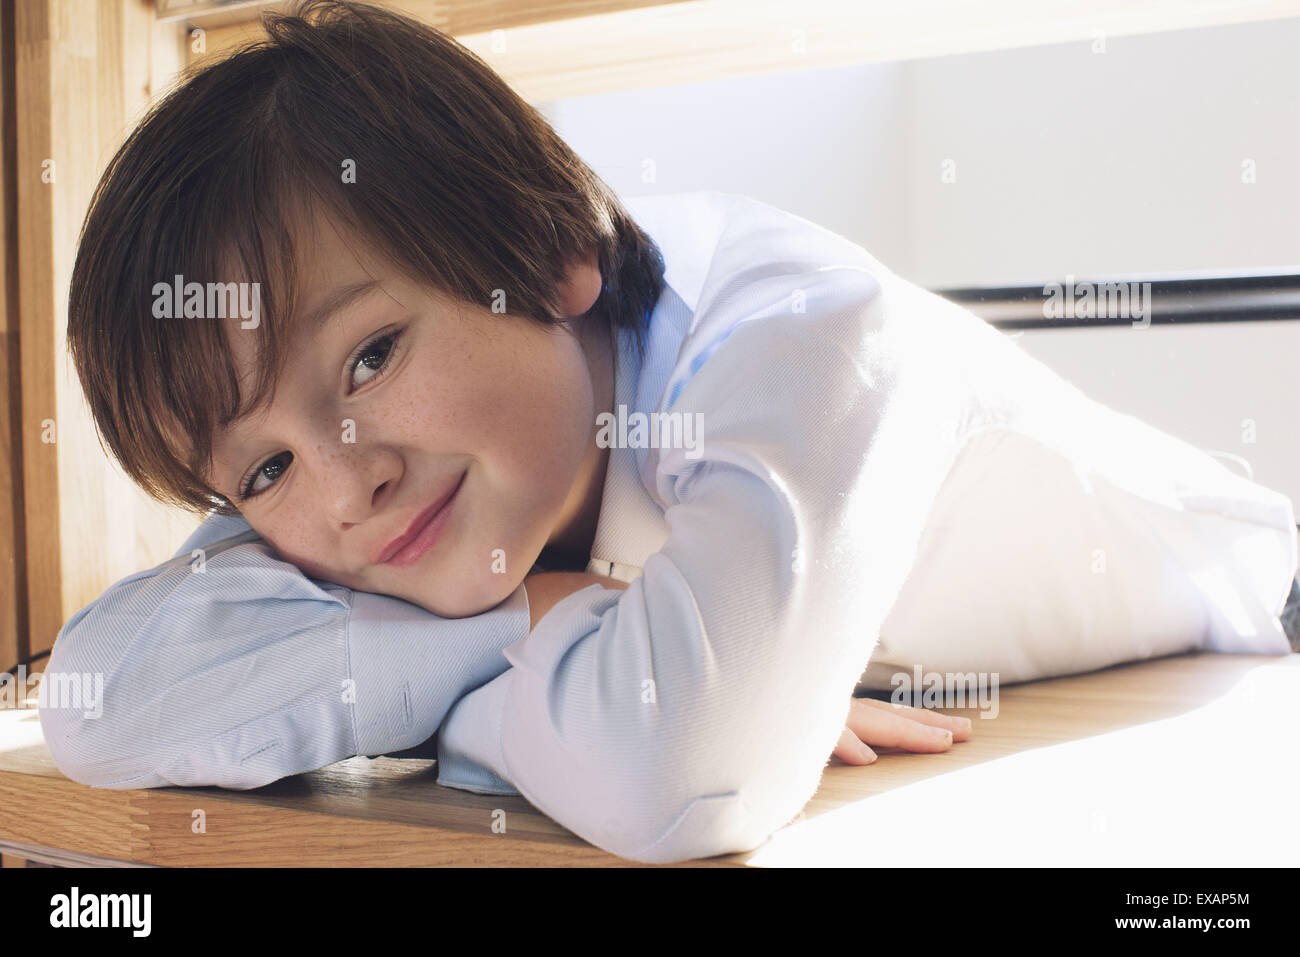 Boy resting head on arms, smiling, portrait Stock Photo